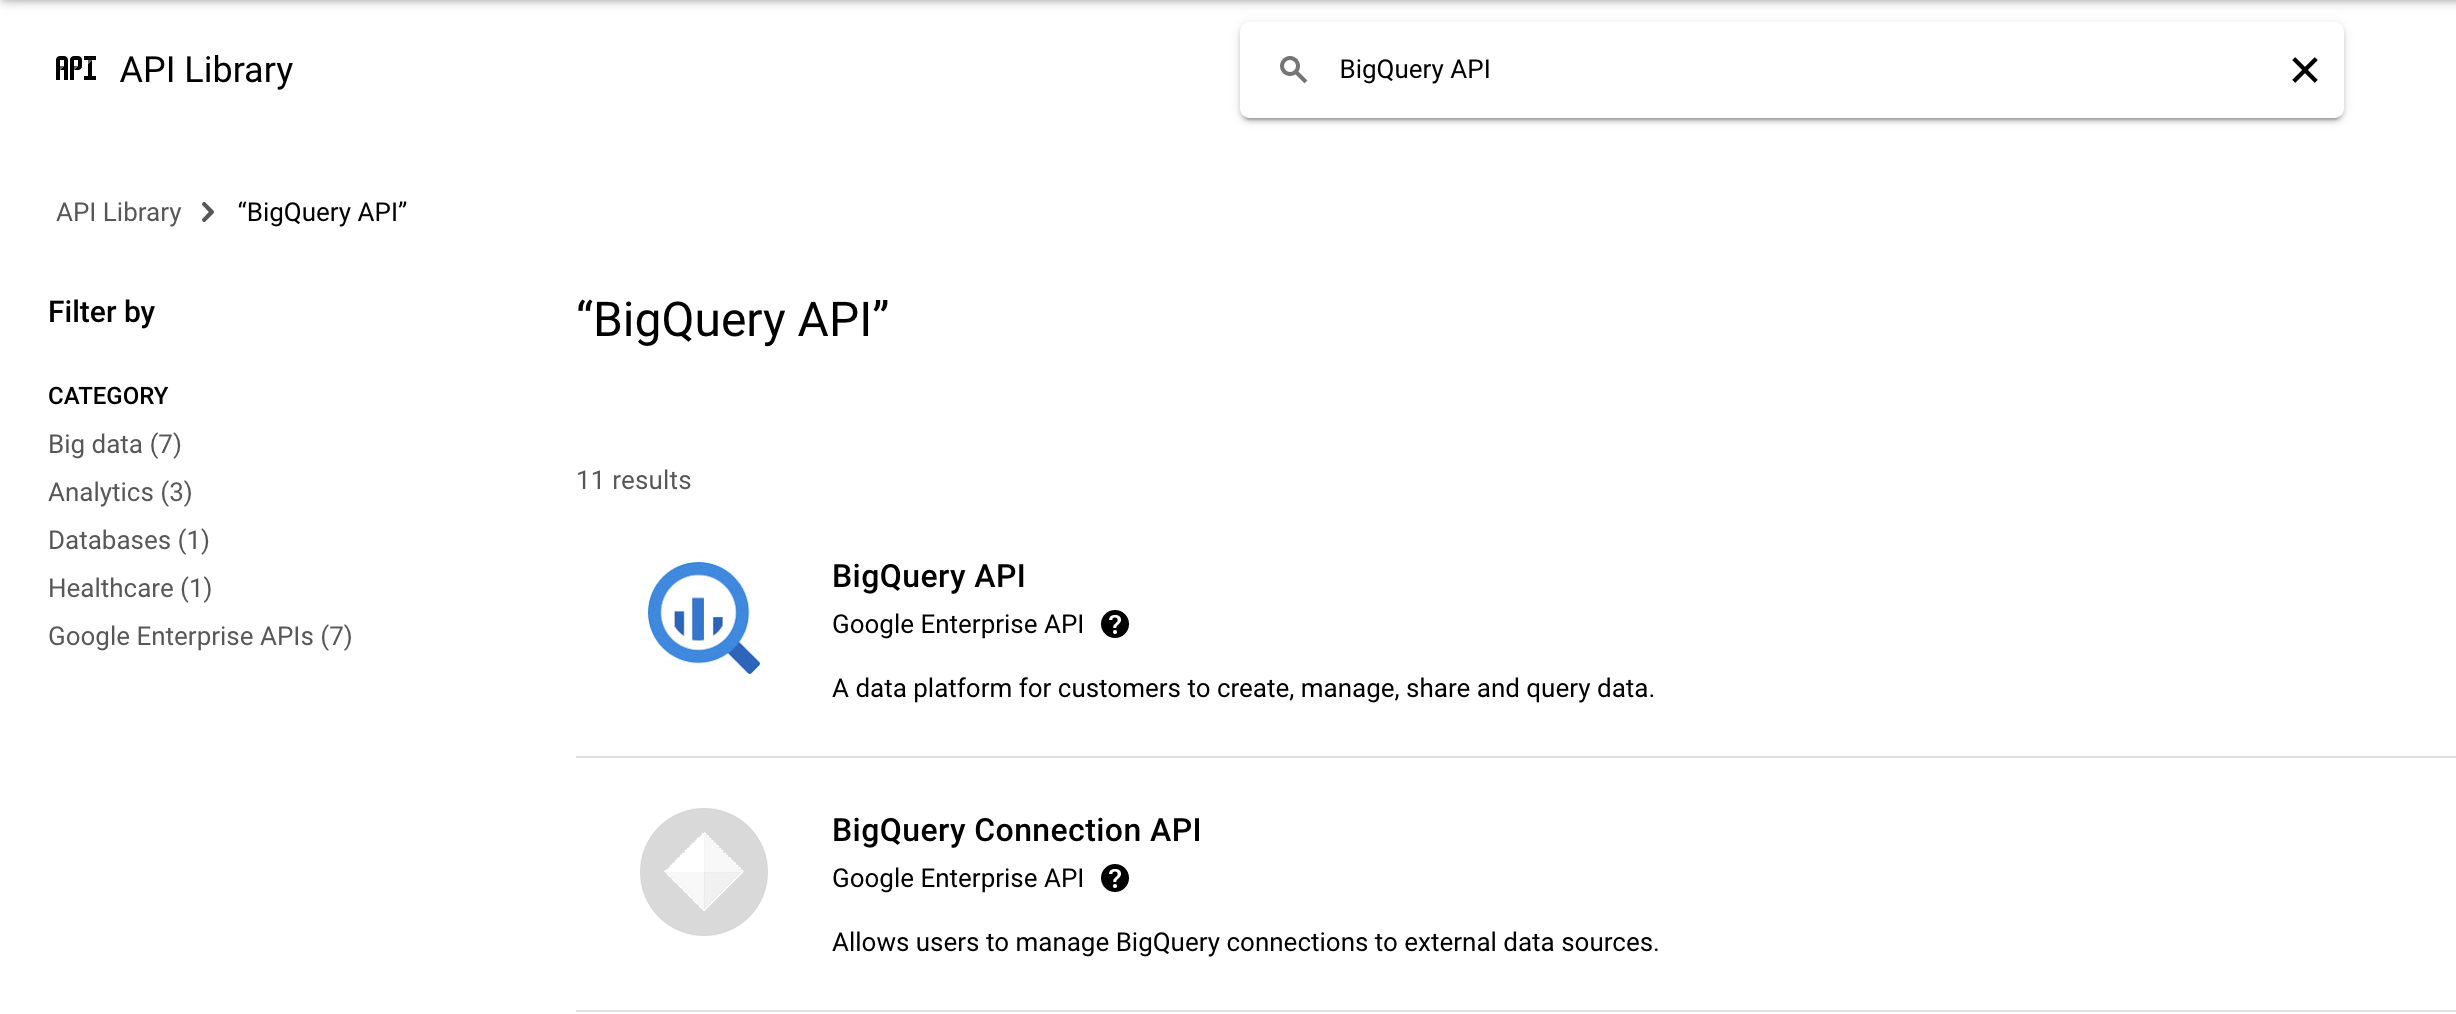 BigQuery API typed in the search box